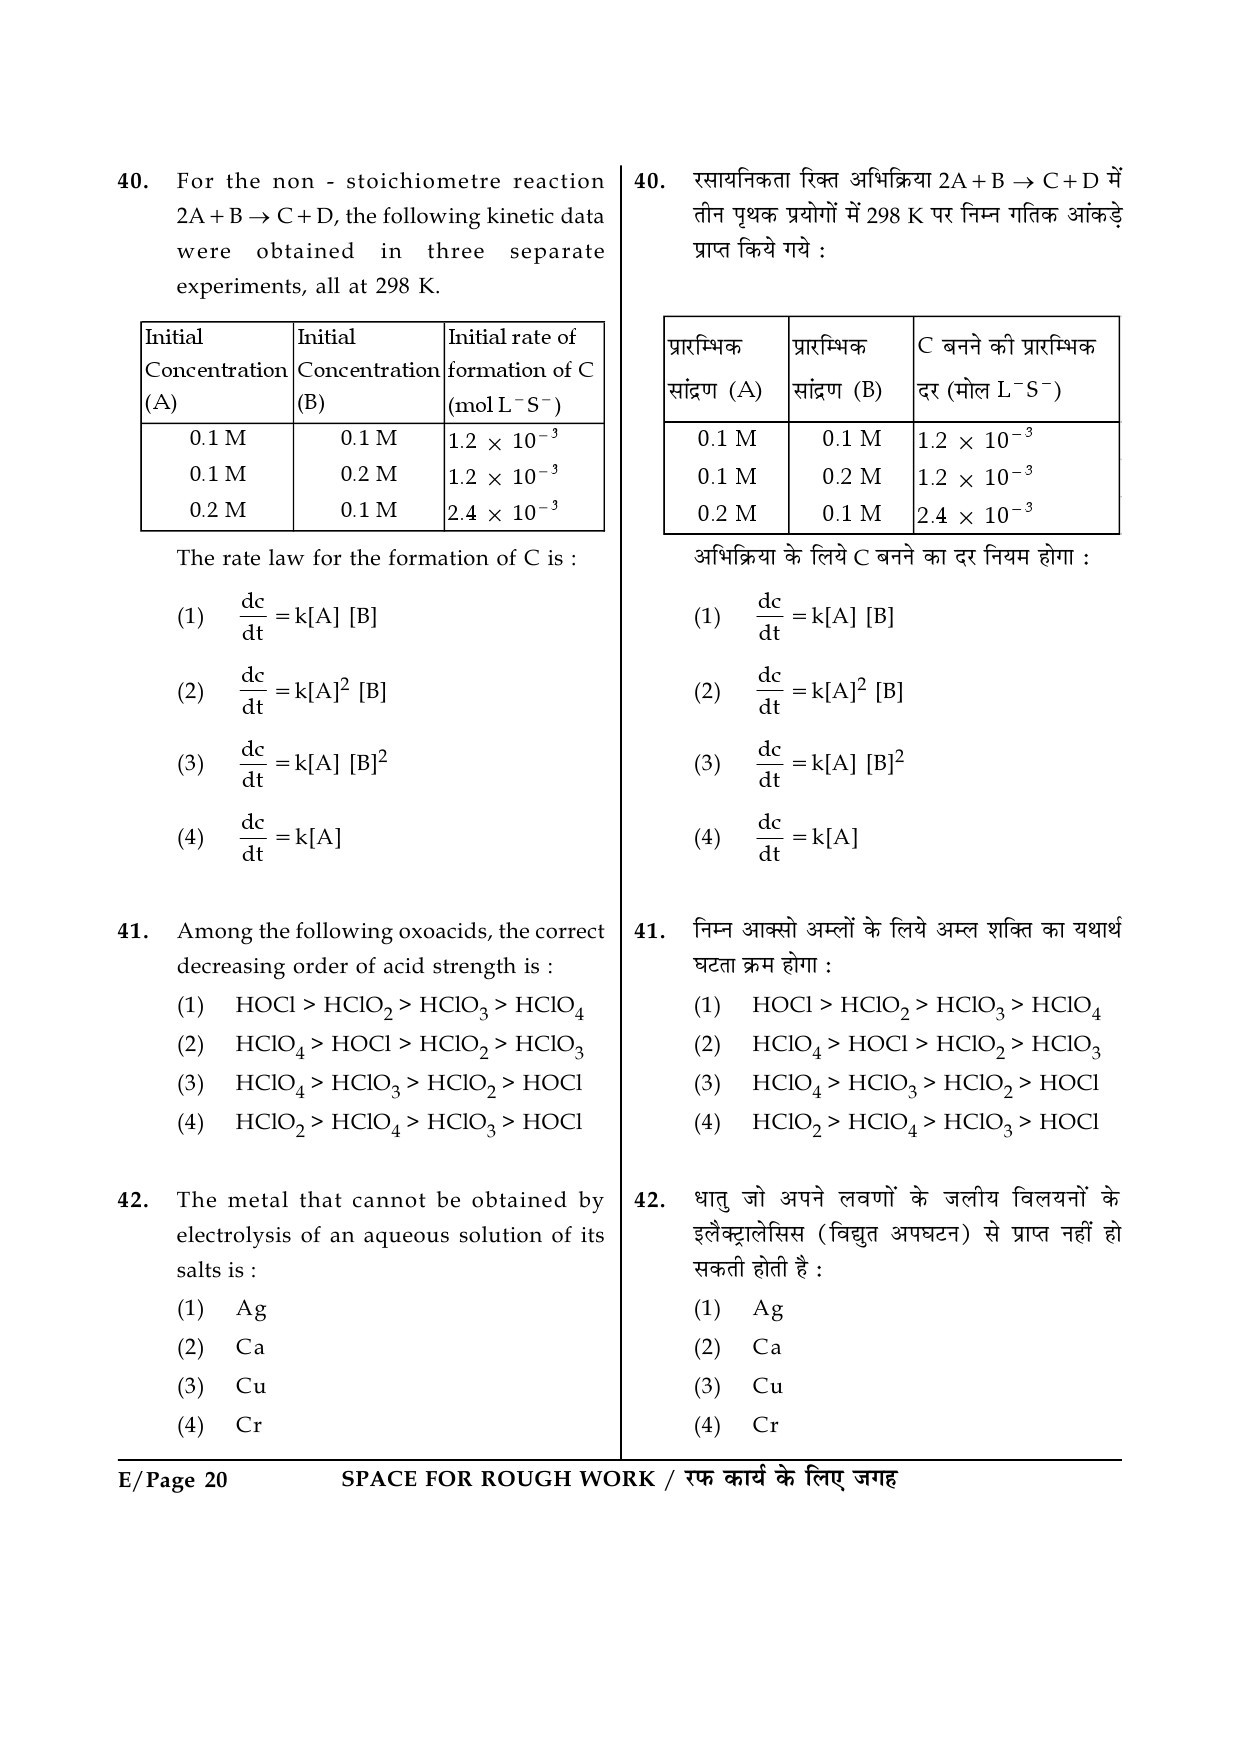 JEE Main Exam Question Paper 2014 Booklet E 20